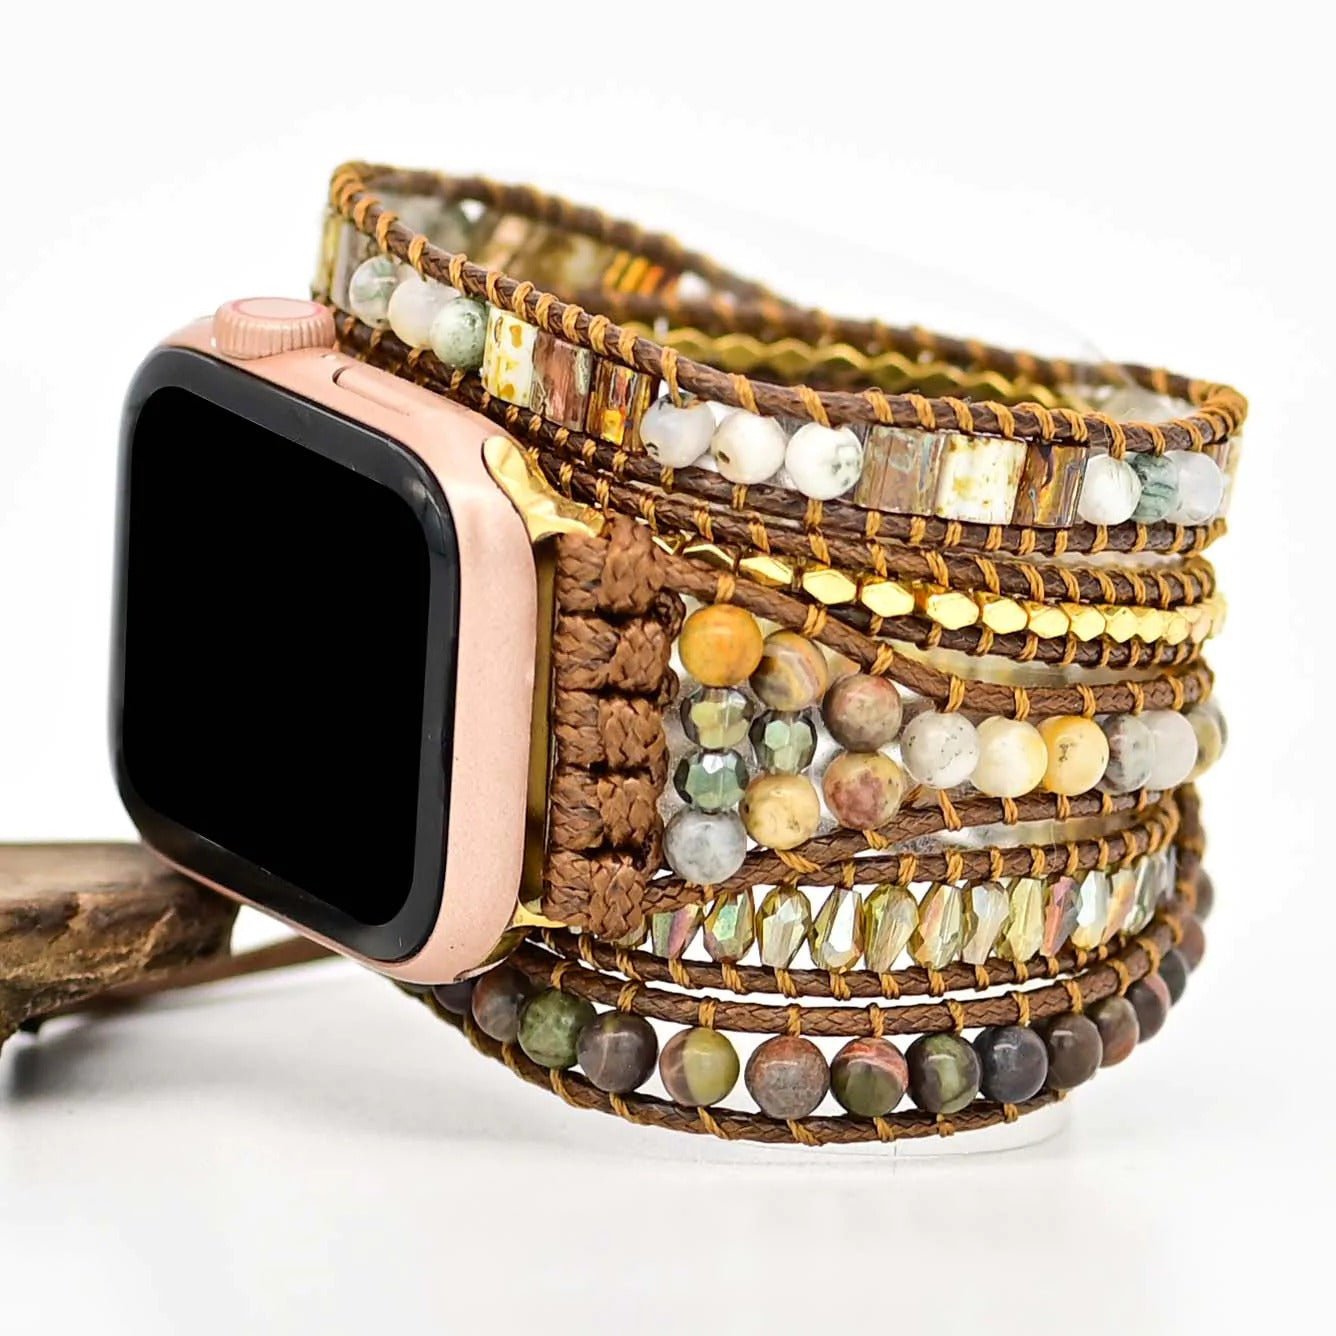 Earth Goddess Strap For Apple Watch